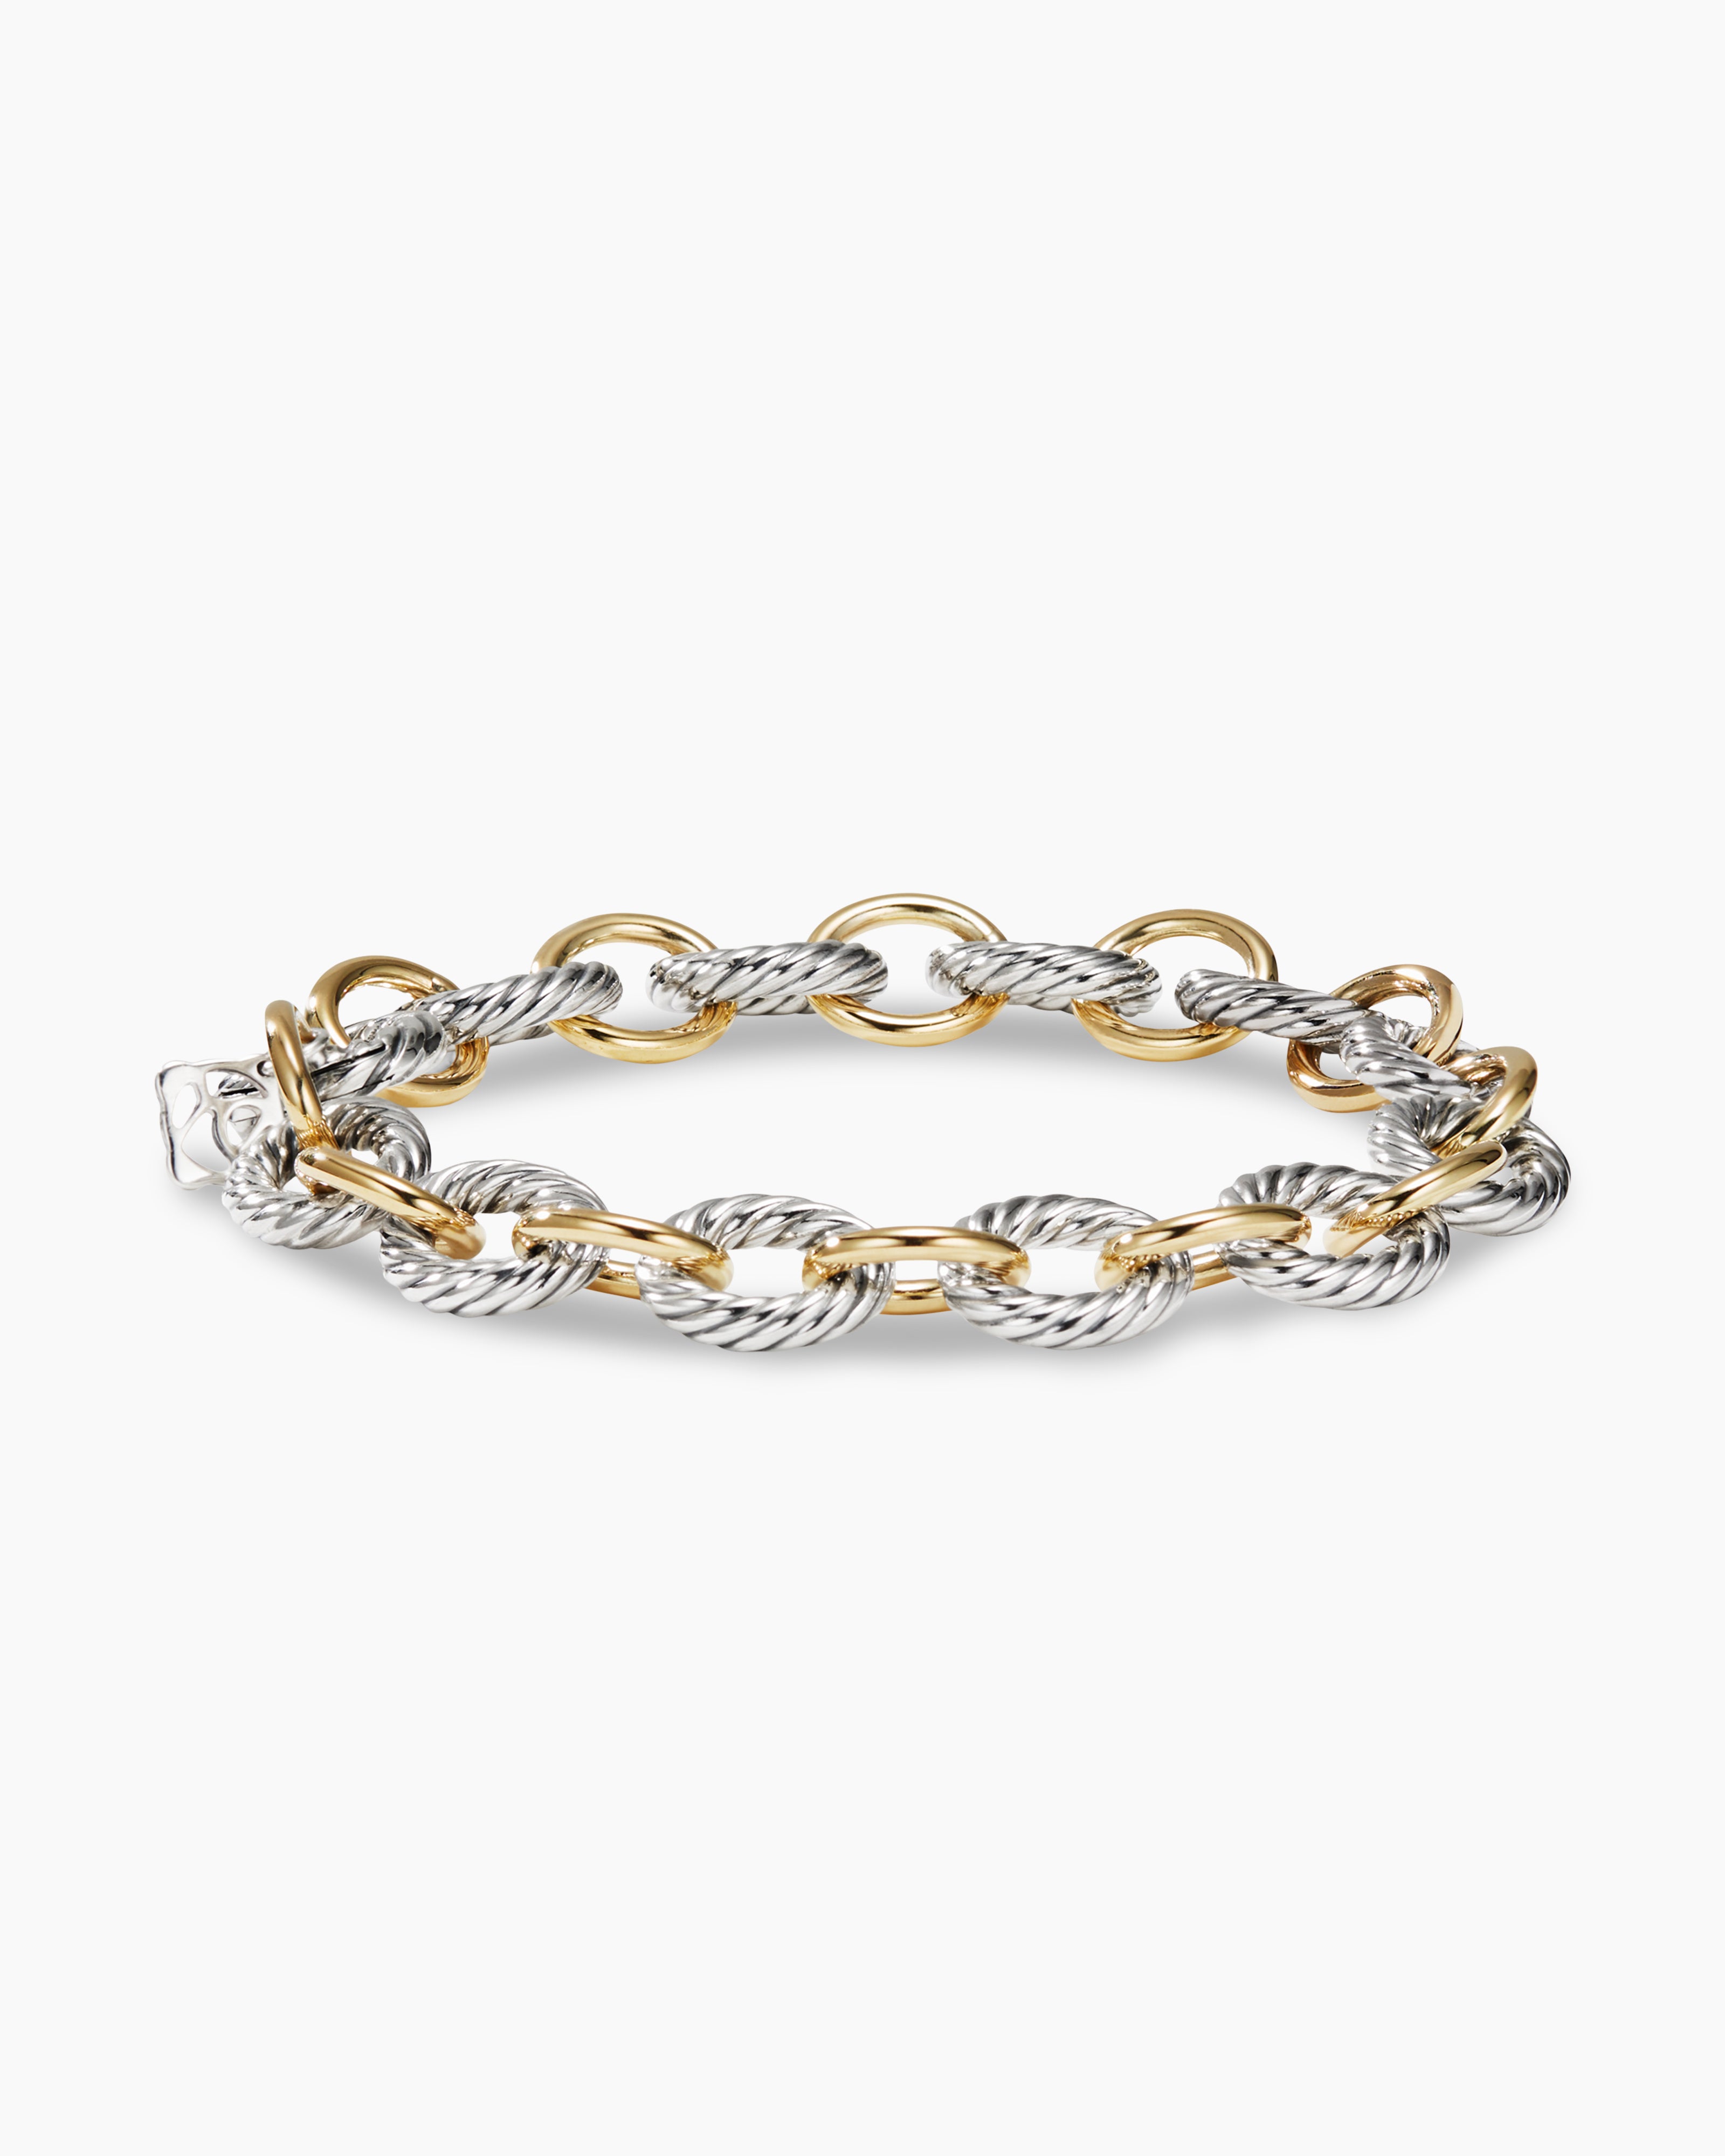 Oval Link Chain Bracelet in Sterling Silver with 18K Yellow Gold, 10mm |  David Yurman